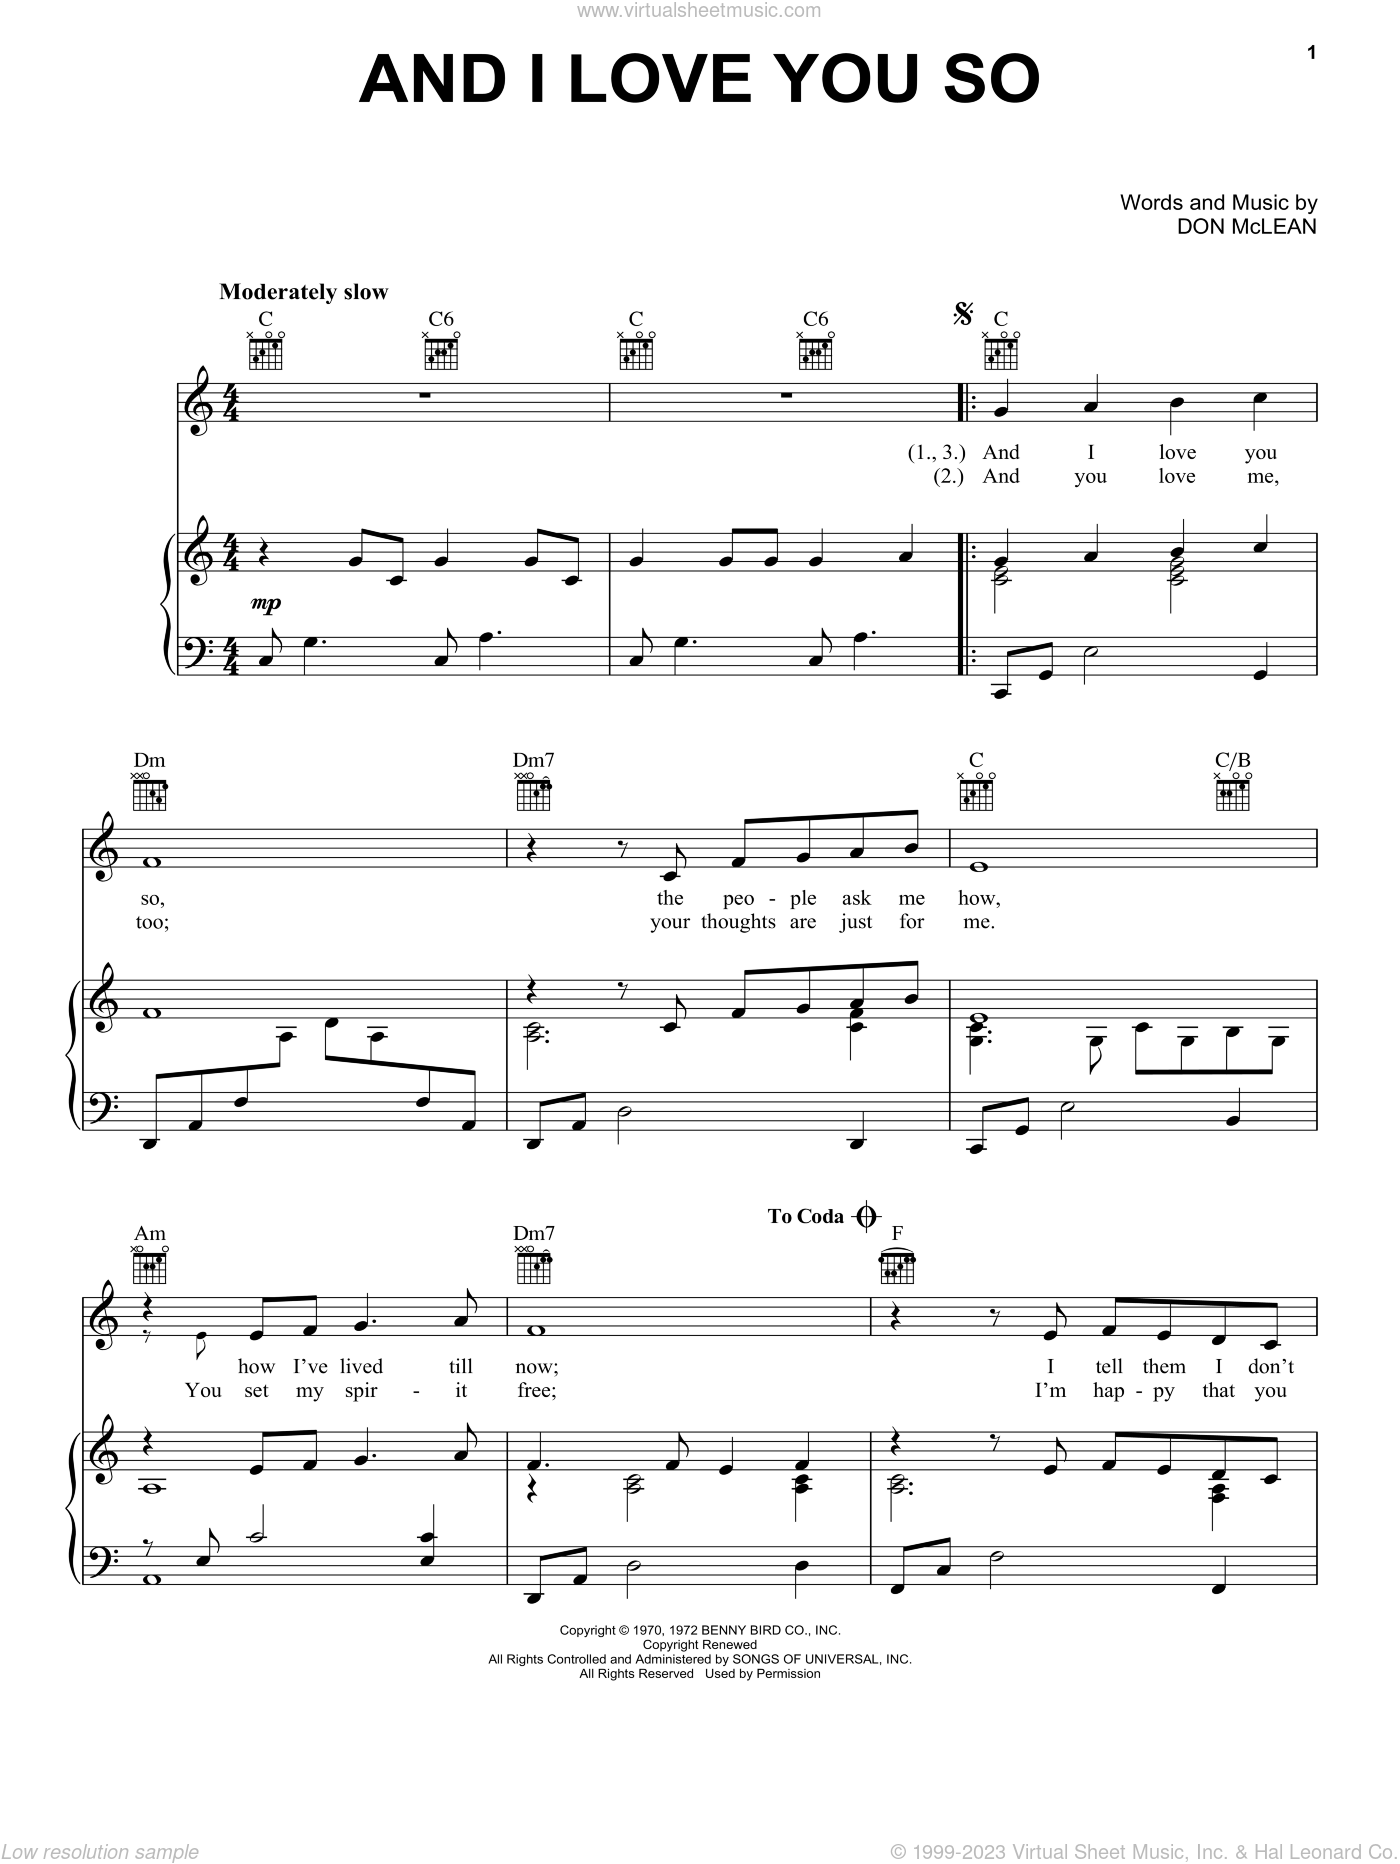 McLean - And I Love You So sheet music for voice, piano or guitar